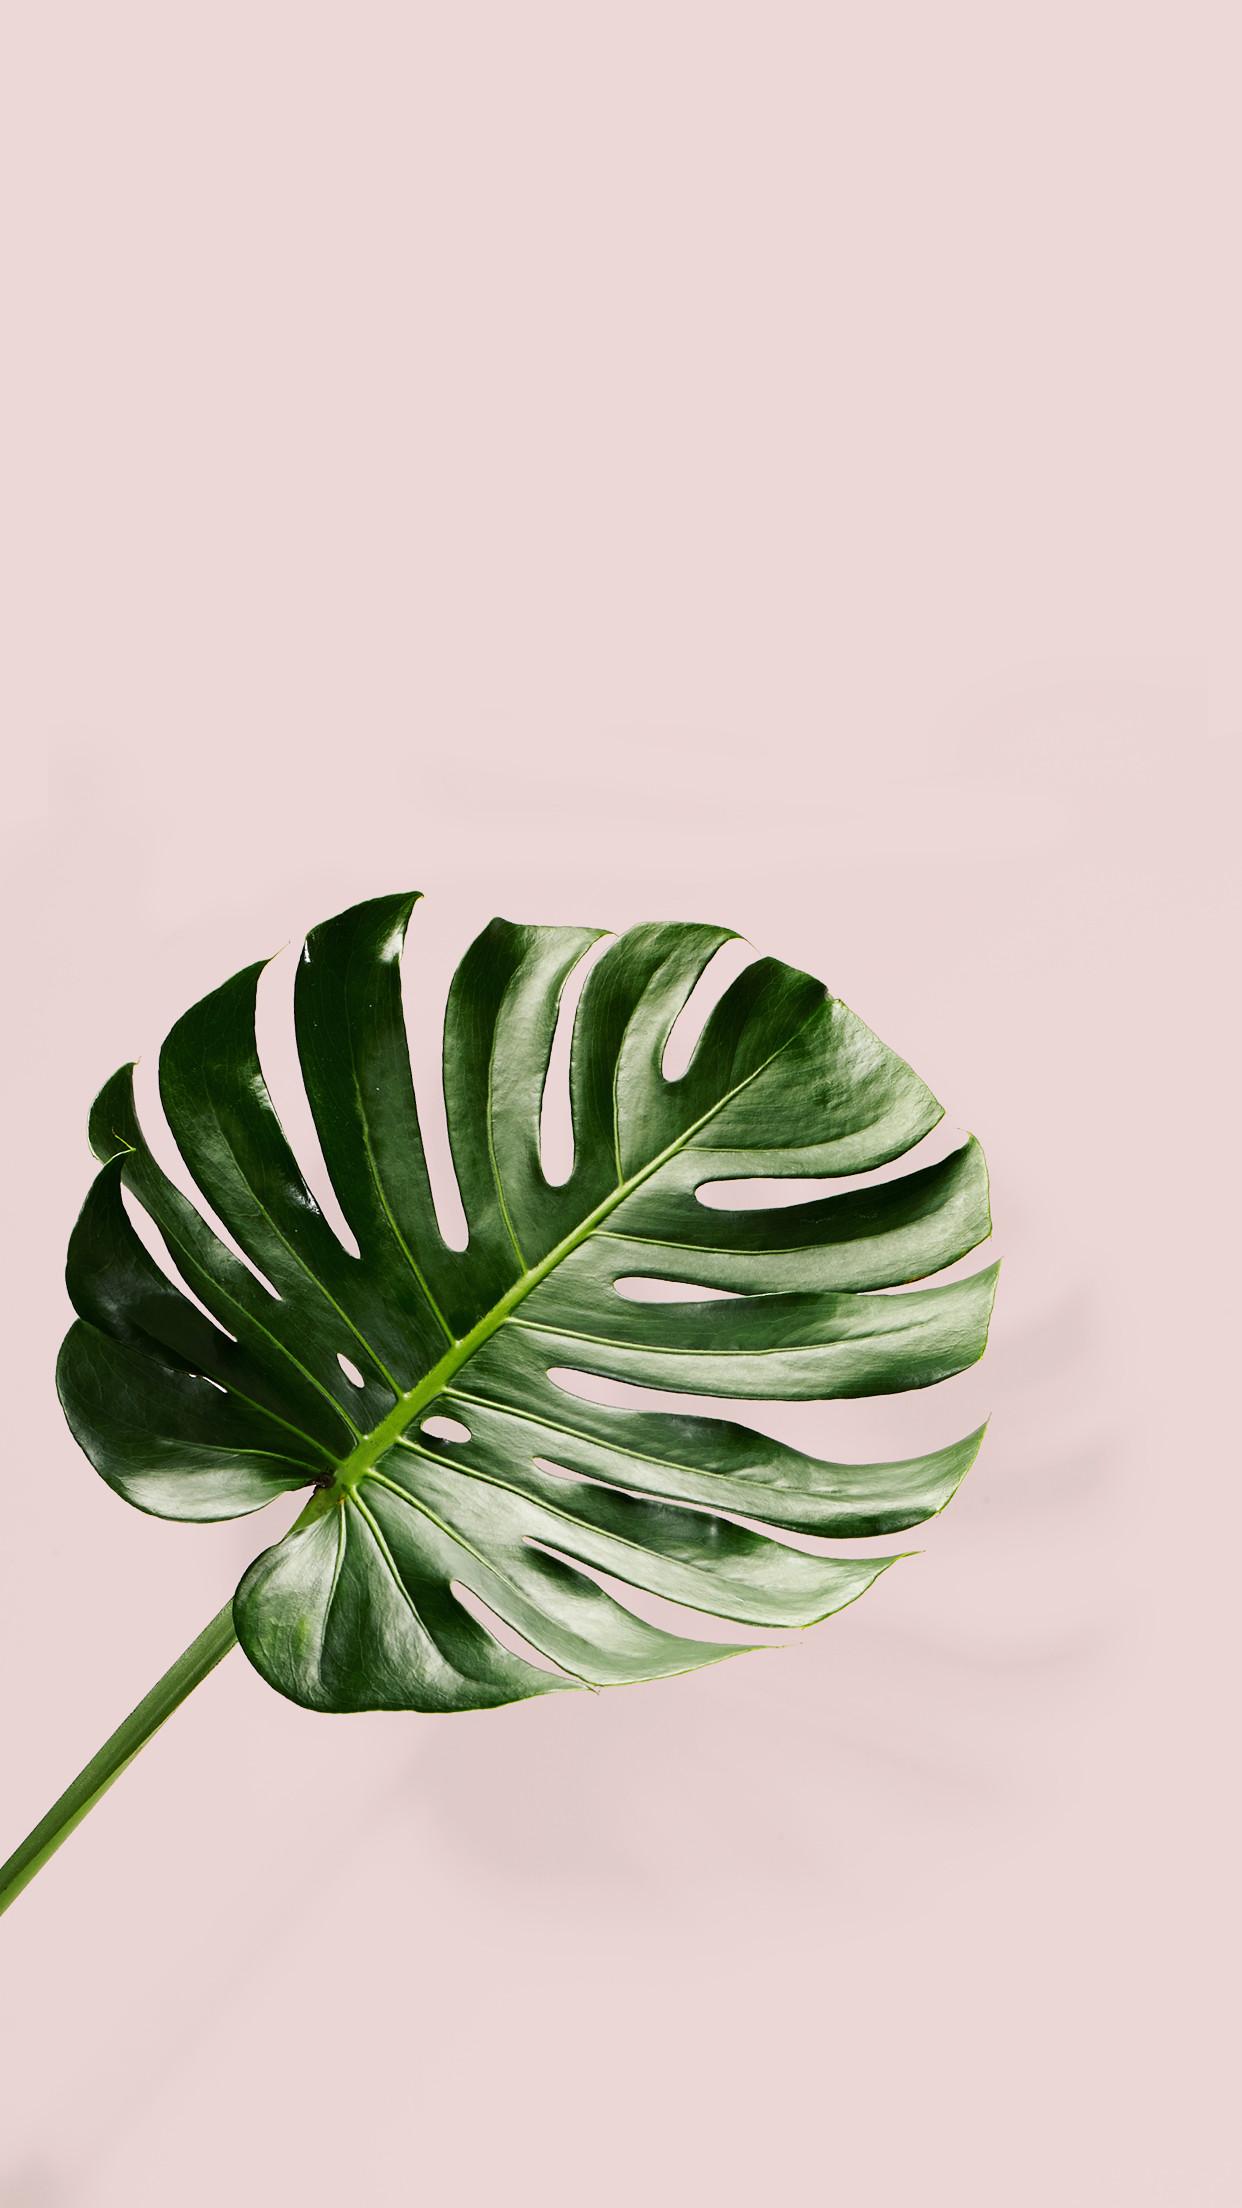 A large green leaf on a pink background - Leaves